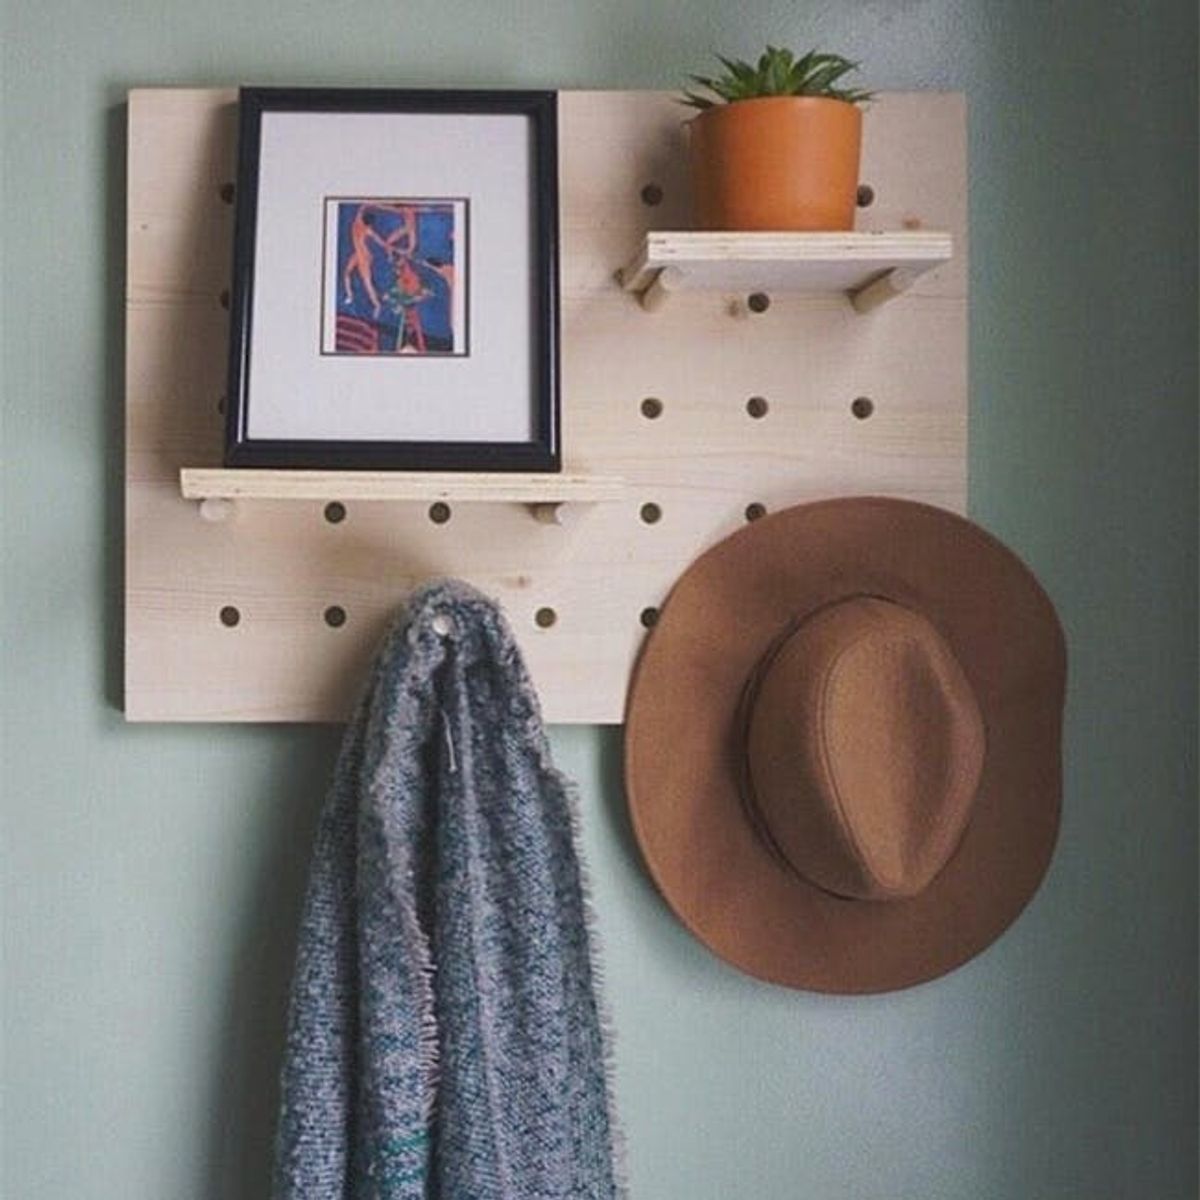 These Are the Hottest Dorm Room Decor Trends According to Etsy